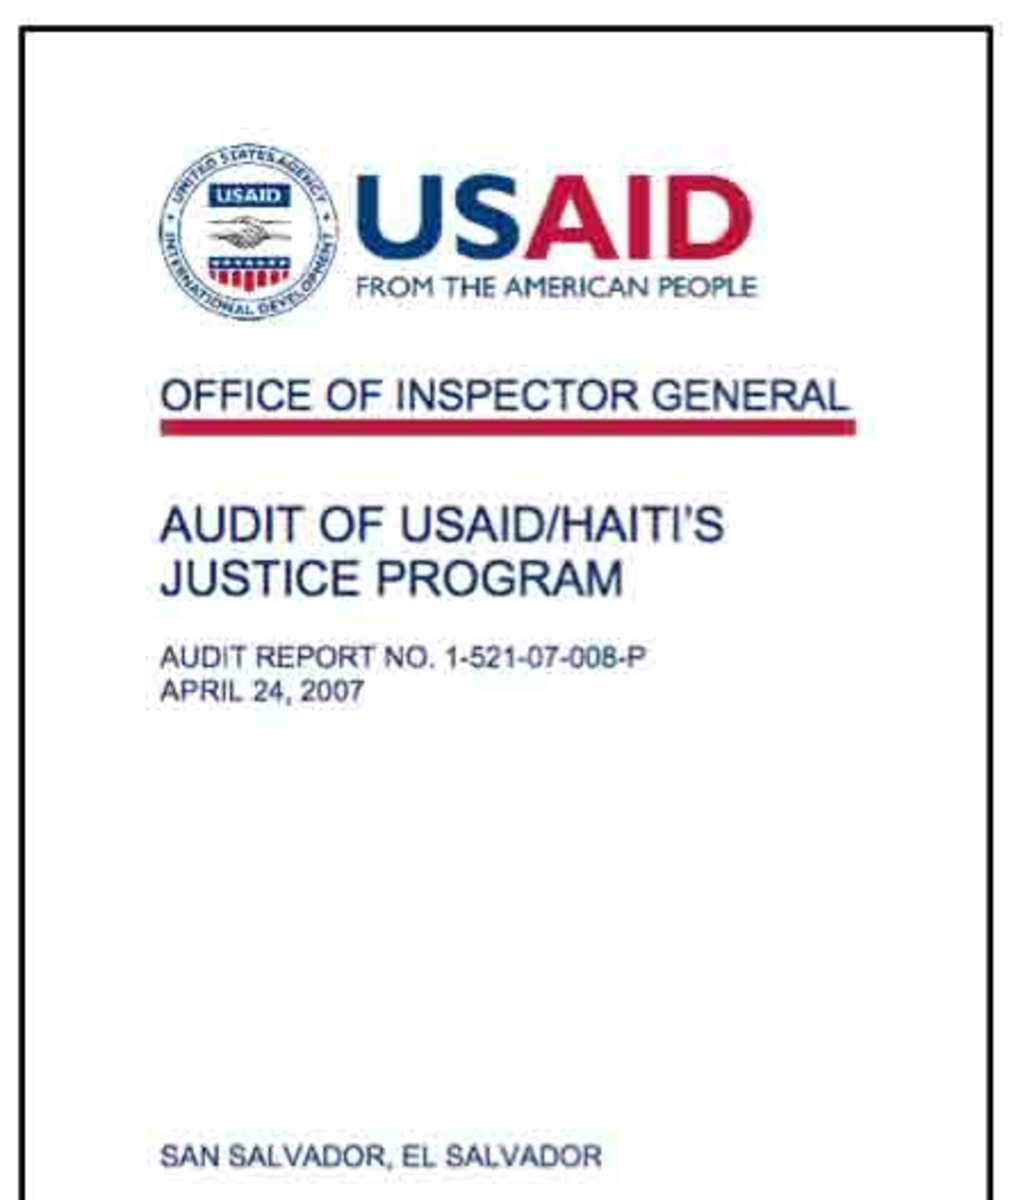 The faults of Haiti's judicial system should not be blamed on Haitians alone. This 2007 report on a US$3.7 million USAID "justice reform" program said it had "not yet produced measurable improvements in the efficiency or effectiveness of Haiti’s court system."